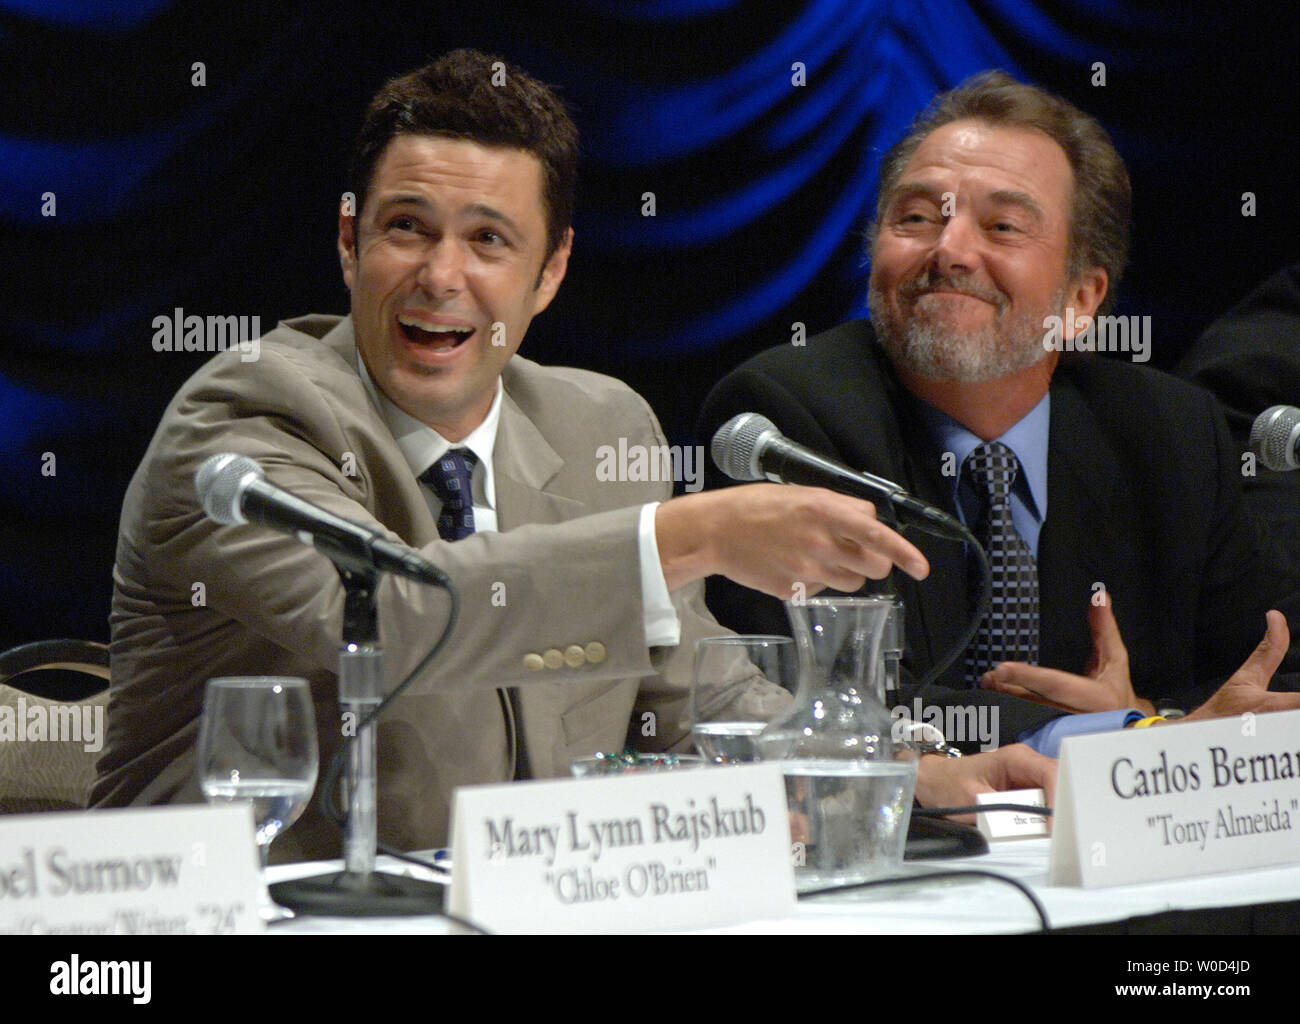 Actors from '24' Carlos Bernard (Tony Almeida) and Gregory Itzin (President Charles Logan), left to right, participate in a Heritage Foundation discussion about Fox TV's '24' and the war on terrorism in Washington on June 23, 2006.   (UPI Photo/Roger L. Wollenberg) Stock Photo